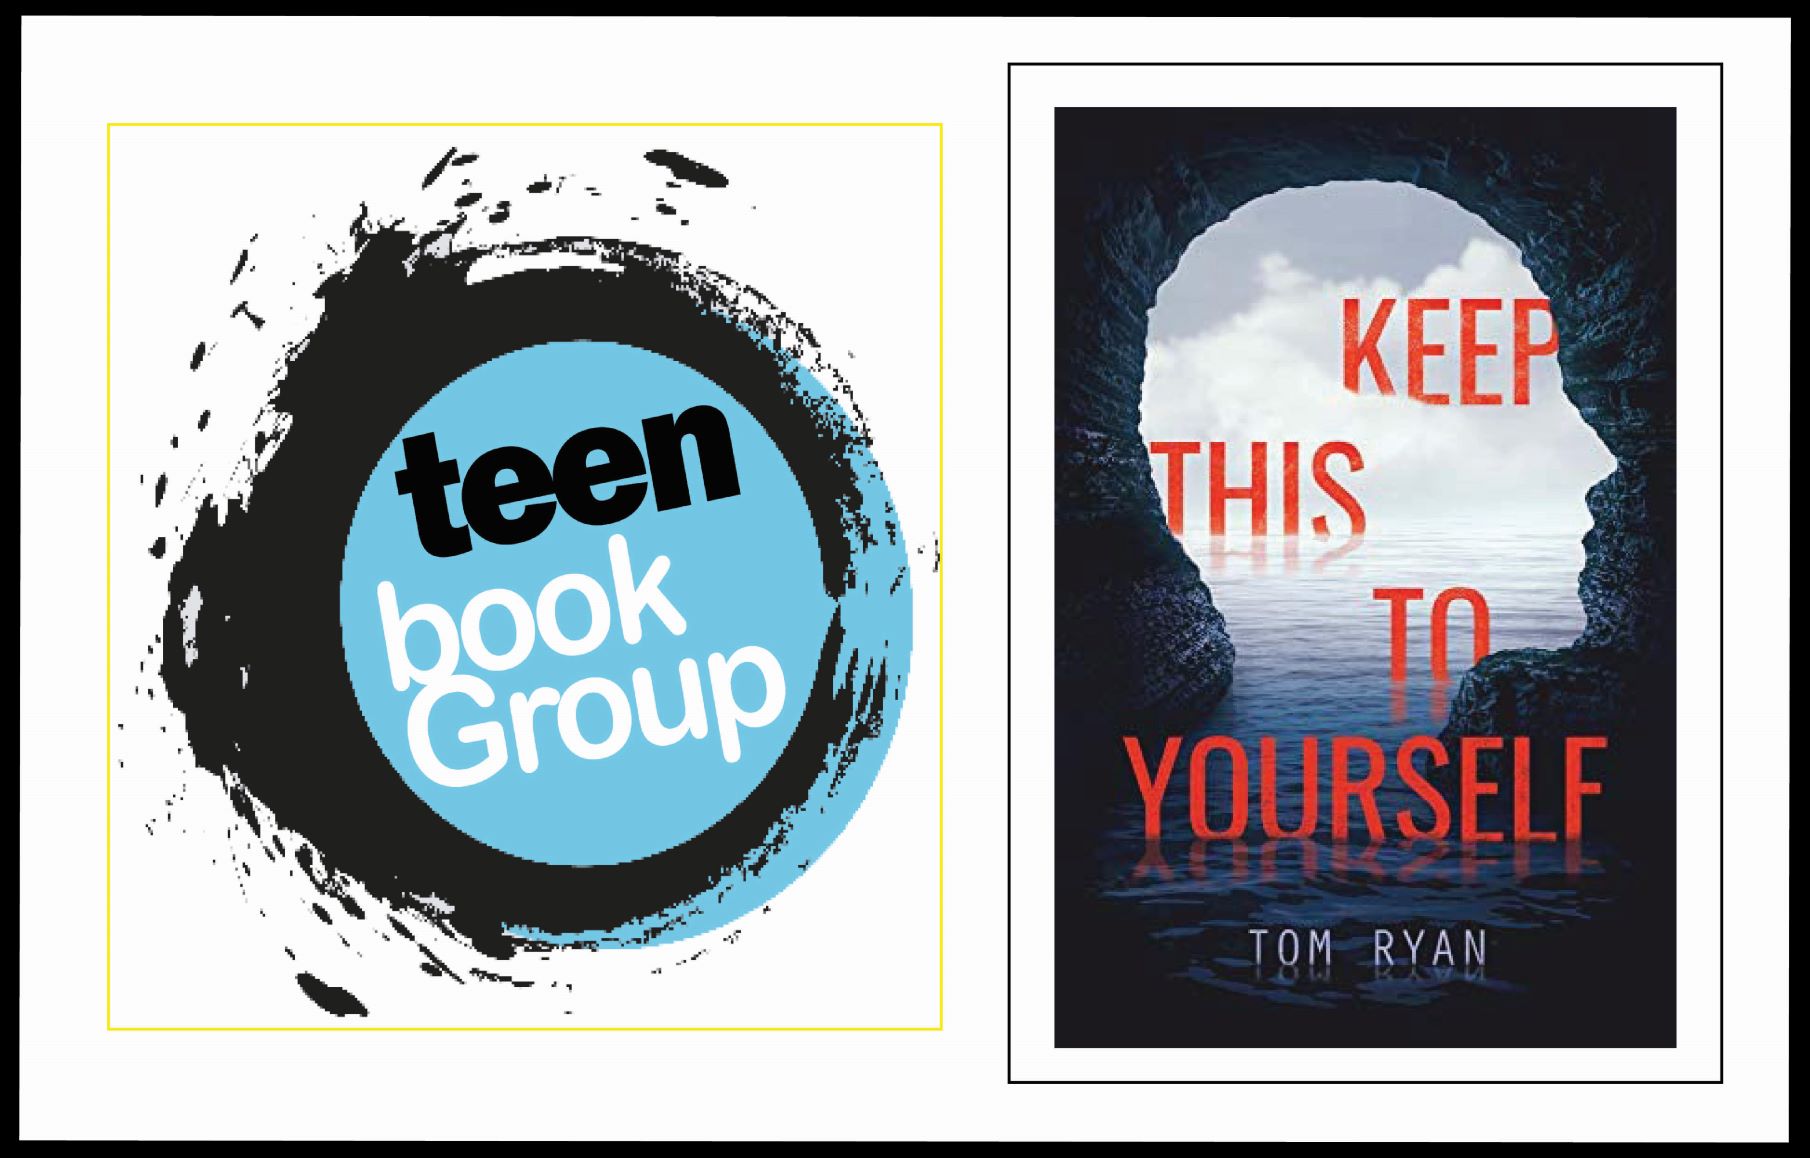 Cornwall Public Library | Teen Book Group